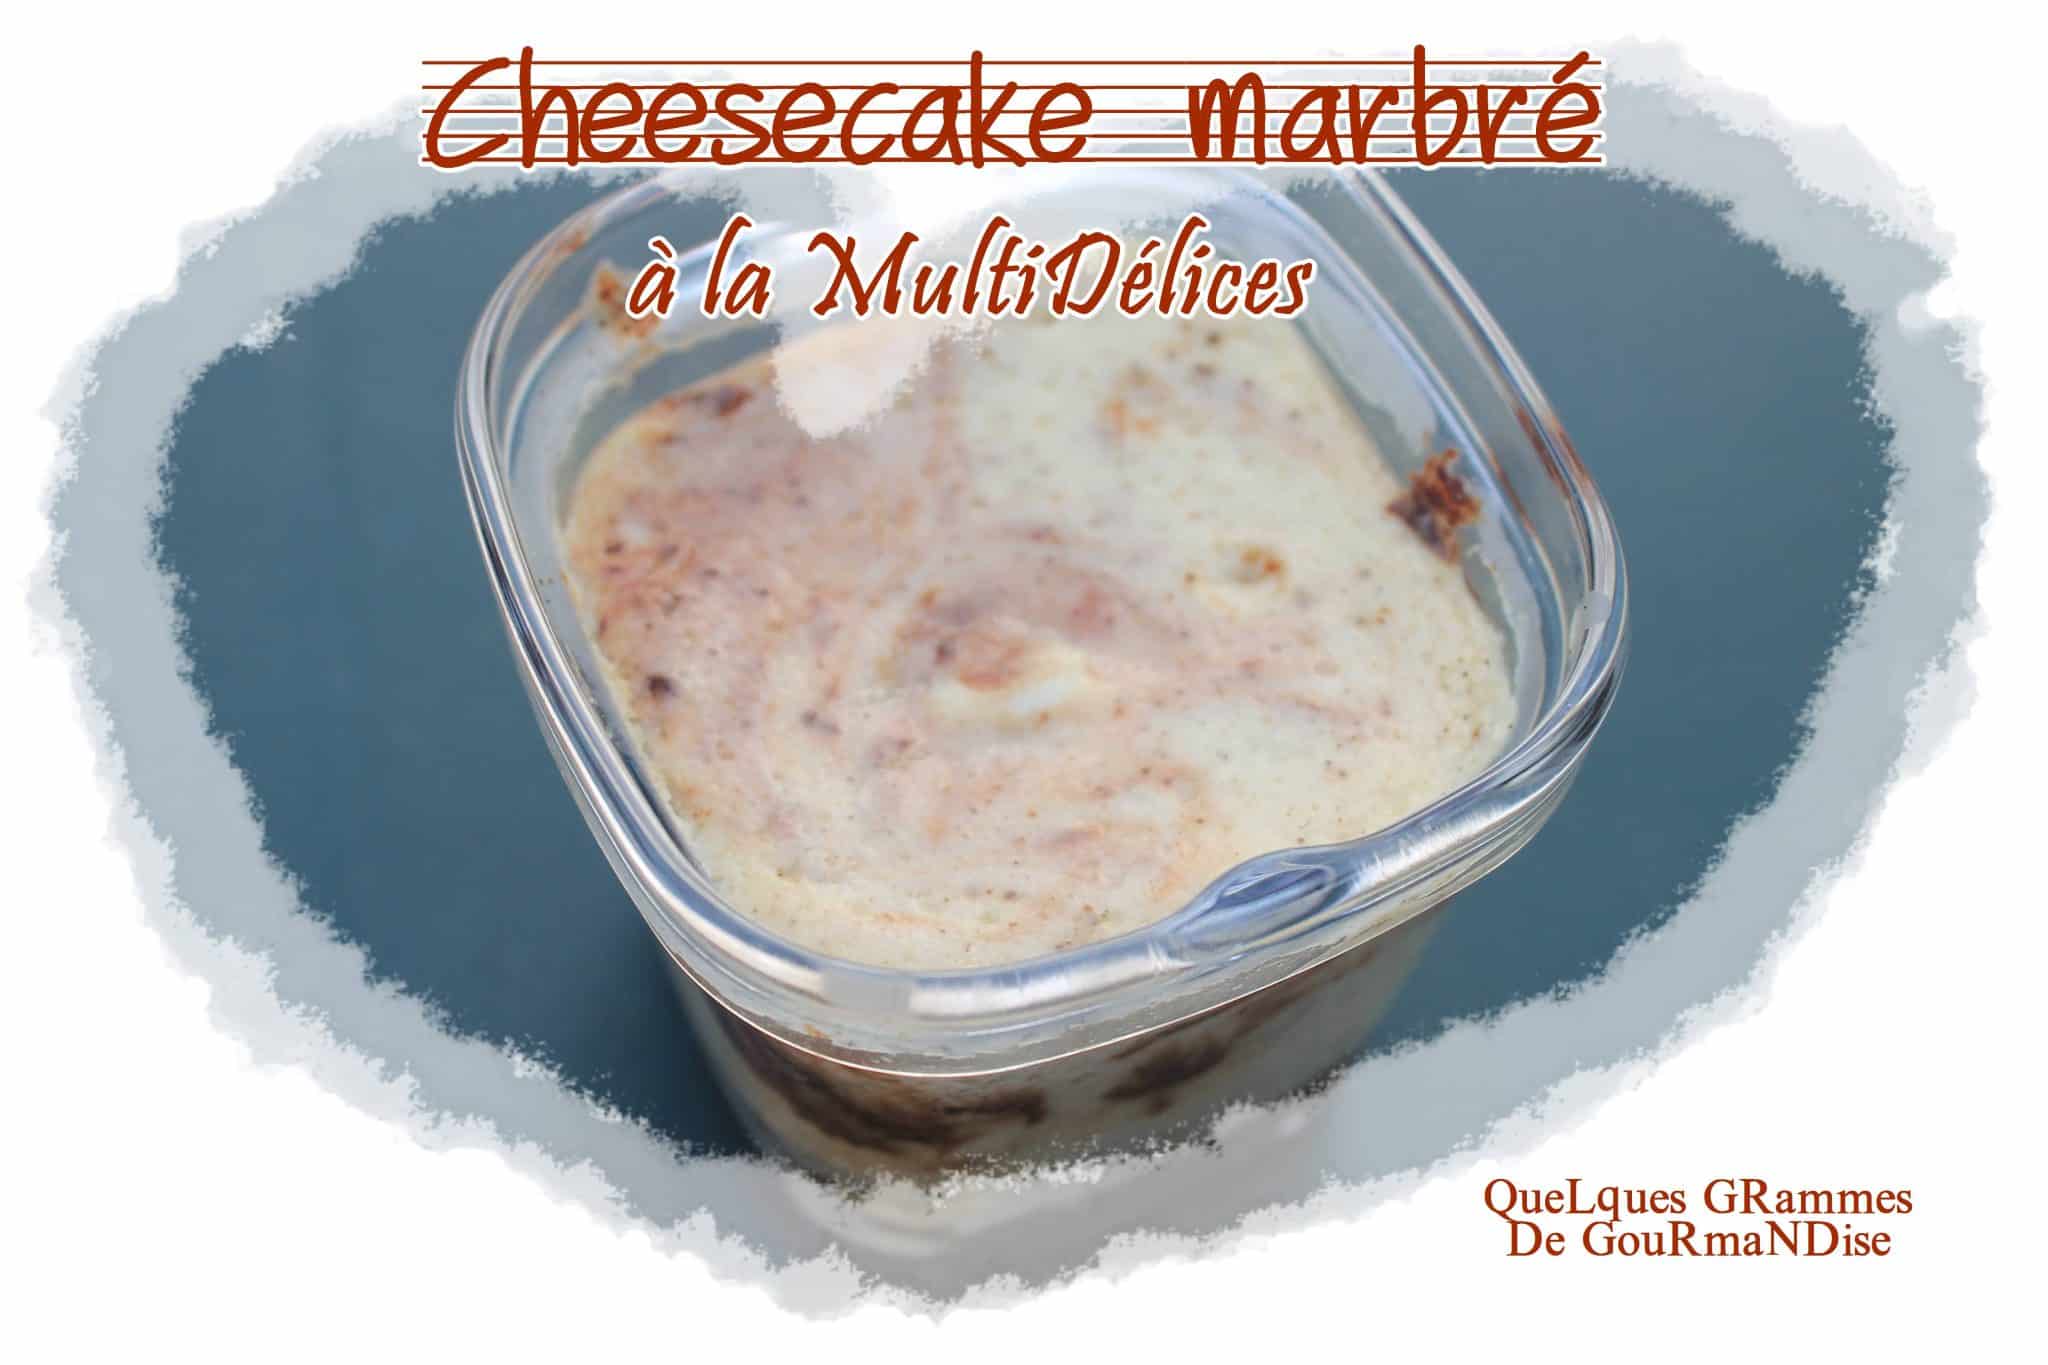 cheesecakemarbremd3 scaled